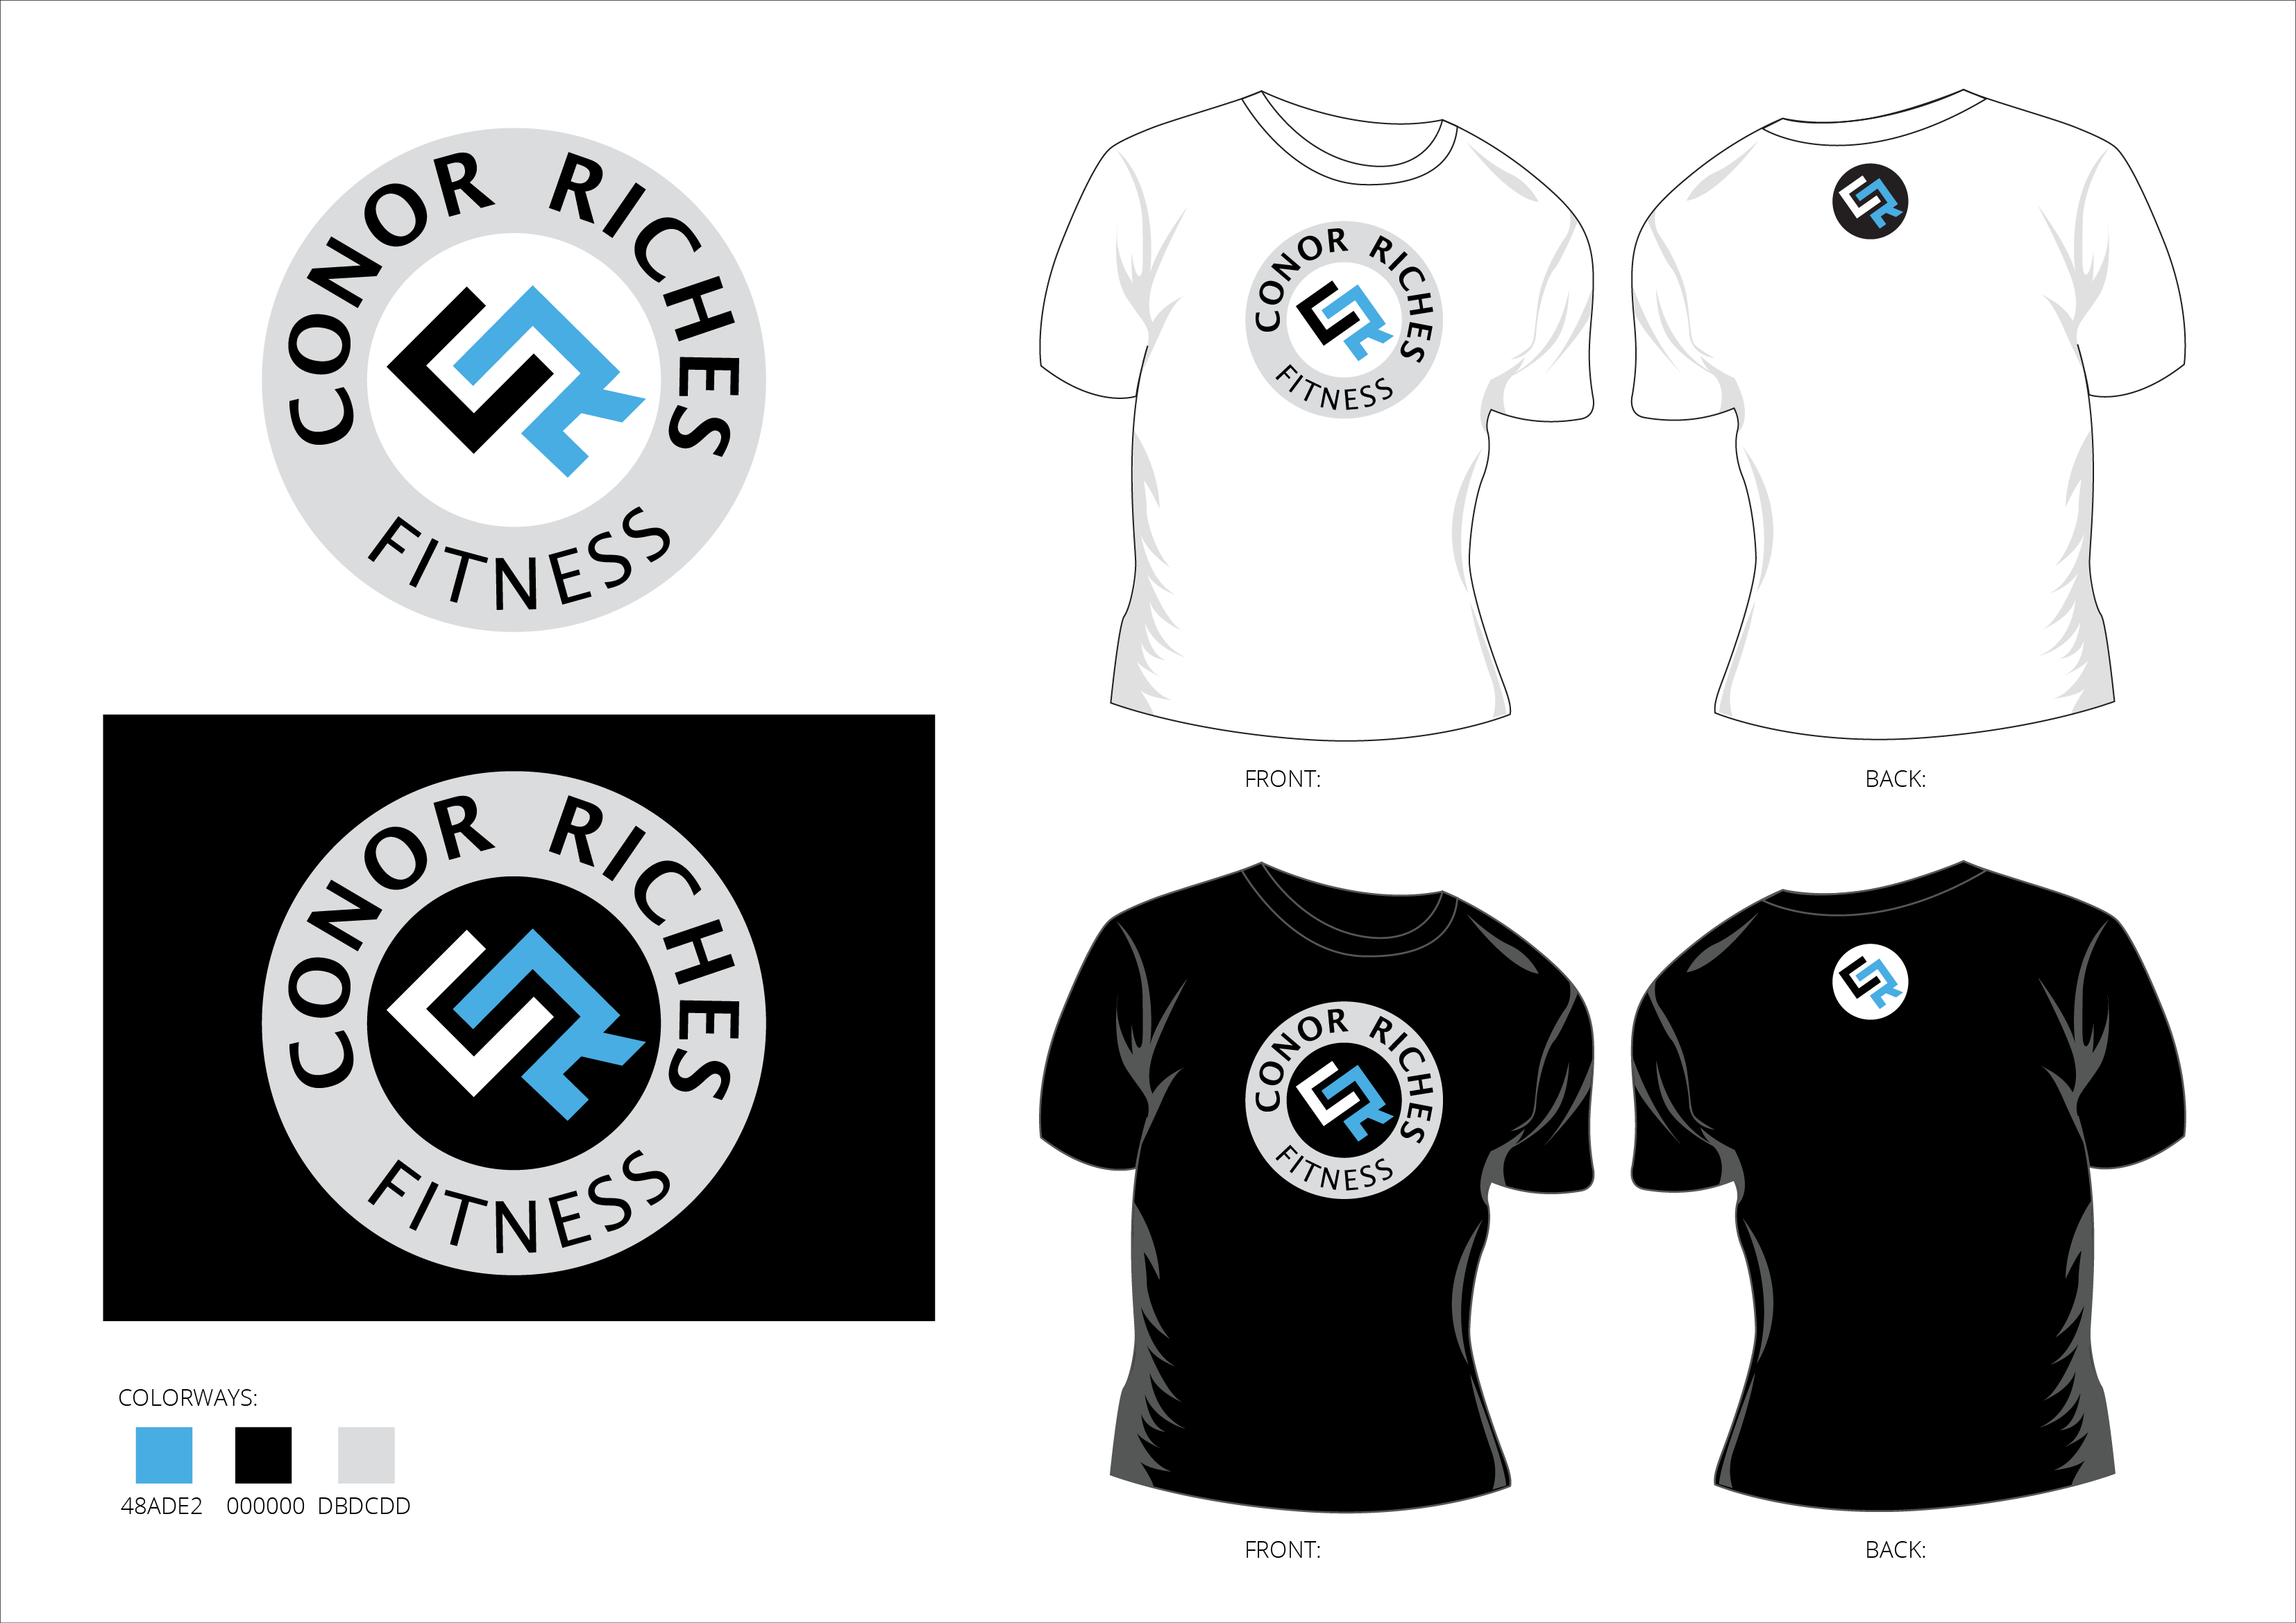 Conor Riches Fitness Logo2.png